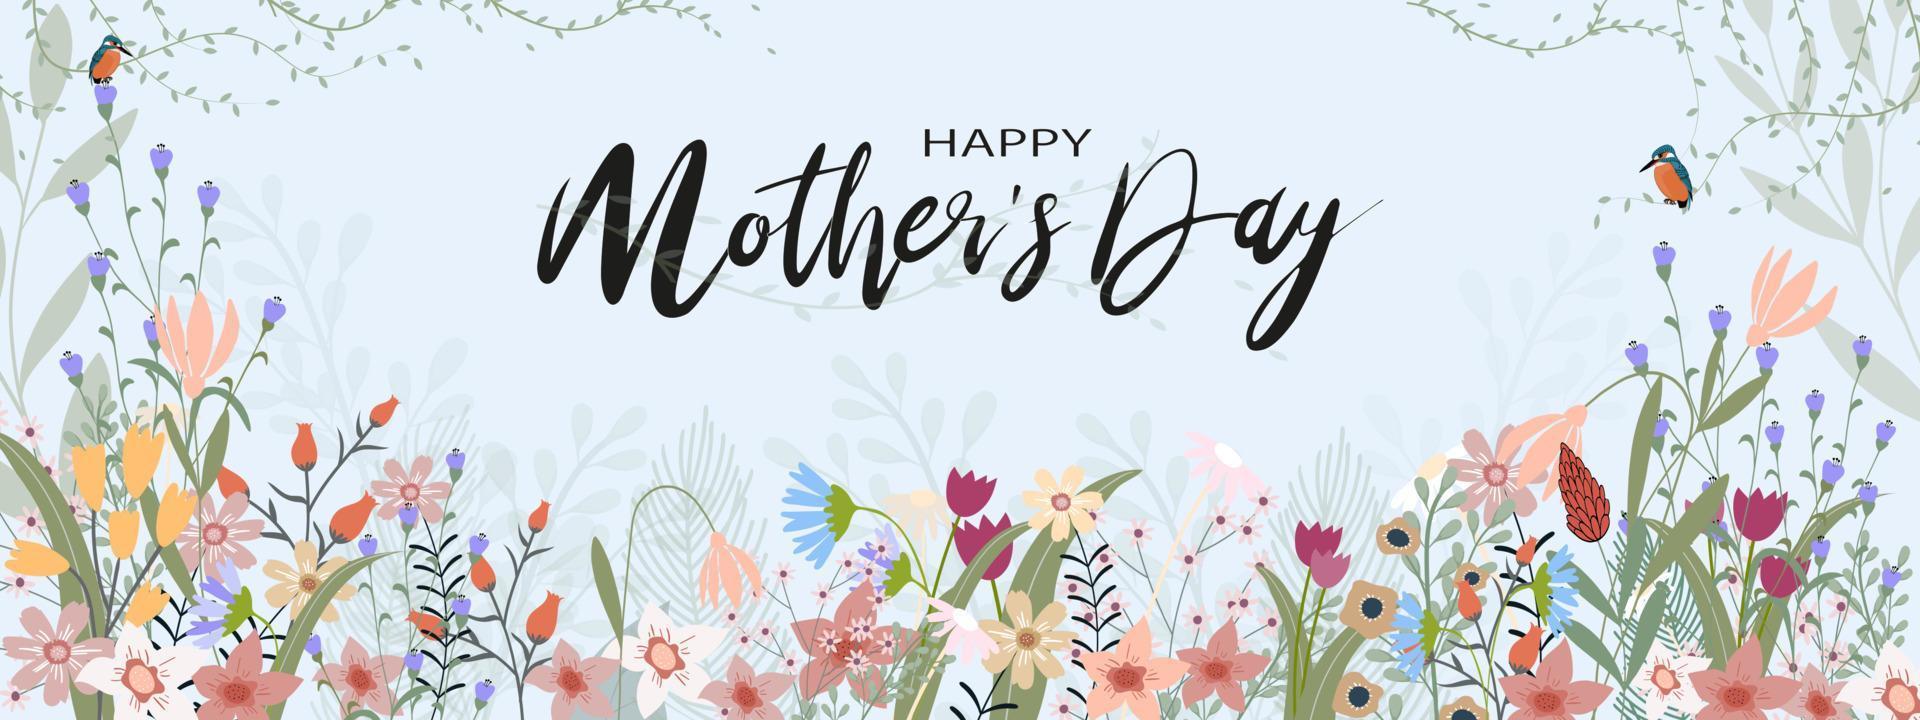 Mother's day banner Spring flowers border with birds on climbing plant on blue pastel background,Vector illustration horizontal card or backdrop of cute blooming flora frame design of Beautiful botany vector